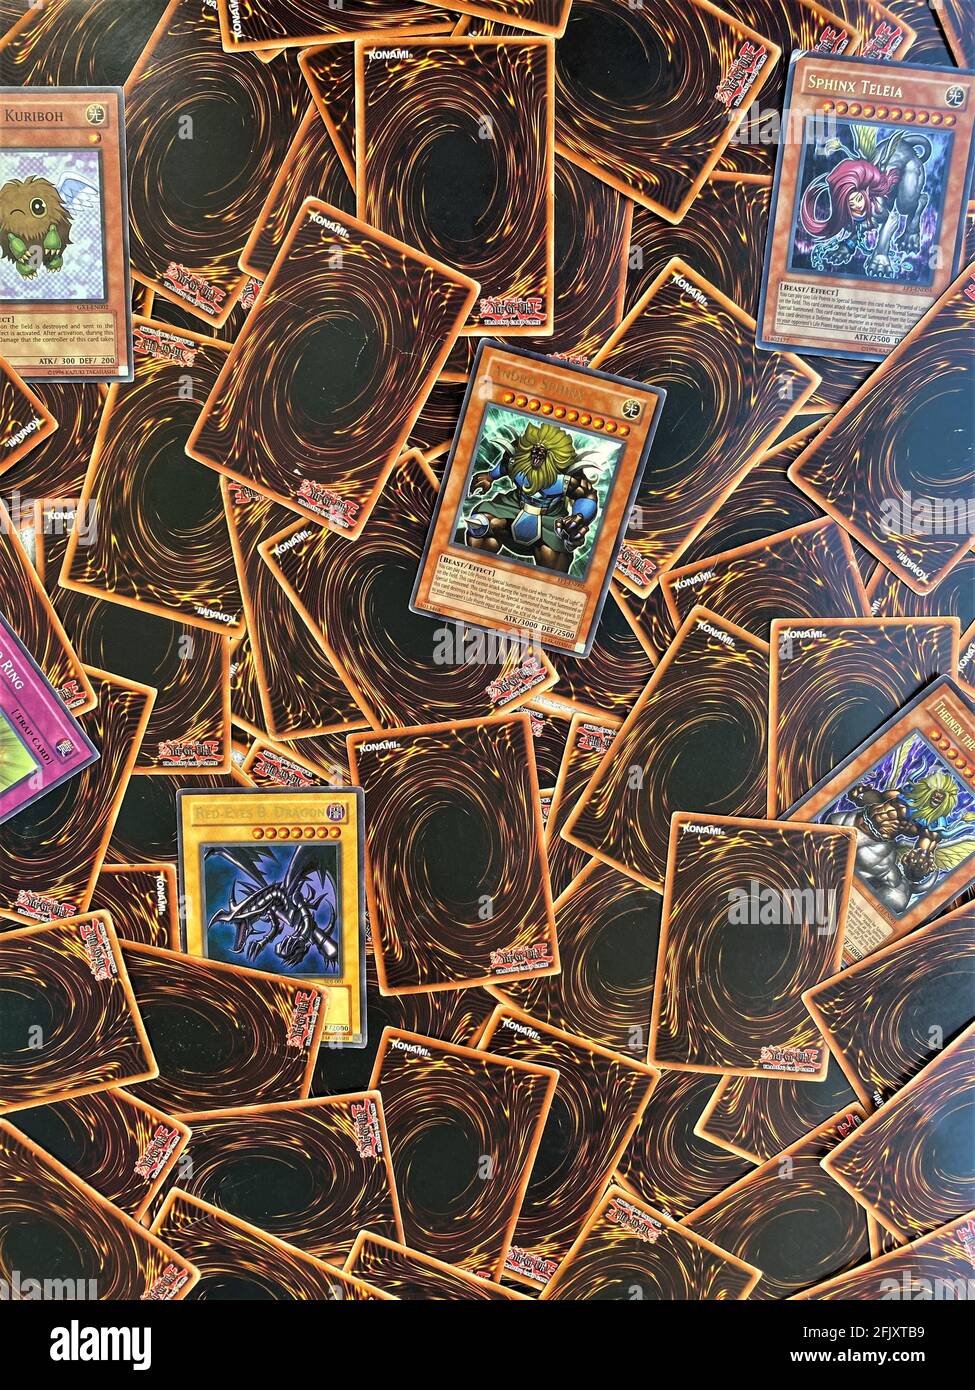 Yu-gi-oh also spelled Yugioh card game as a background that shows different  player cards . Japanese card game by Konami Stock Photo - Alamy